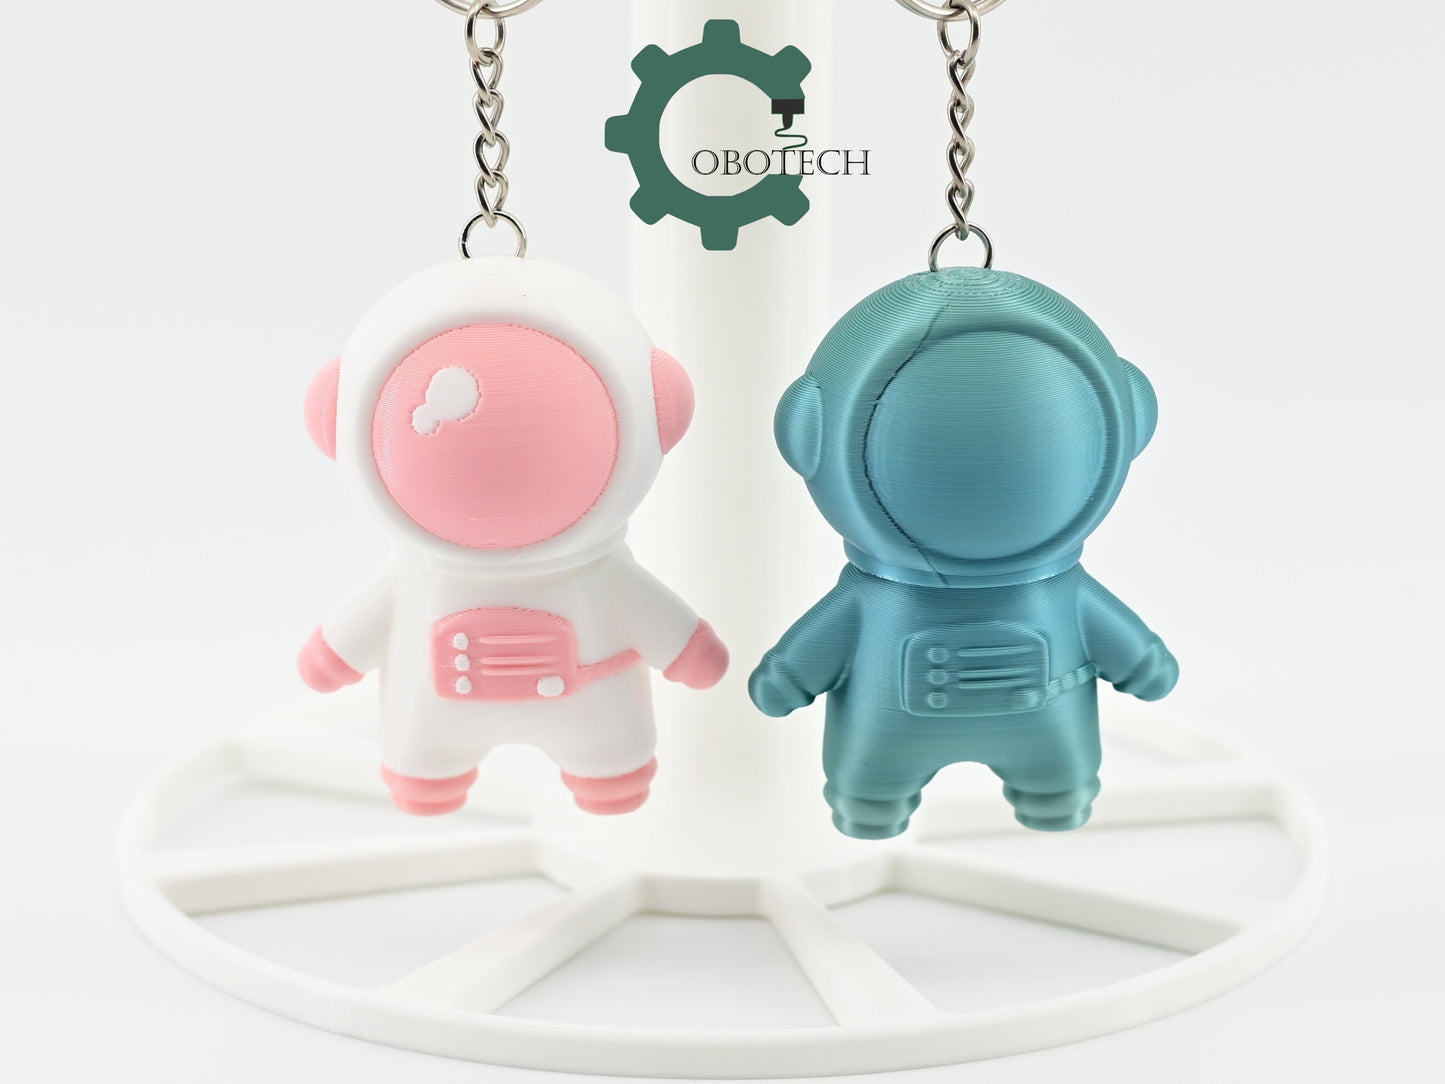 3D Printed Astronaut Coin Storage Keychain by Cobotech, Unique Astronaut Keychain Gifts, Cool Gift